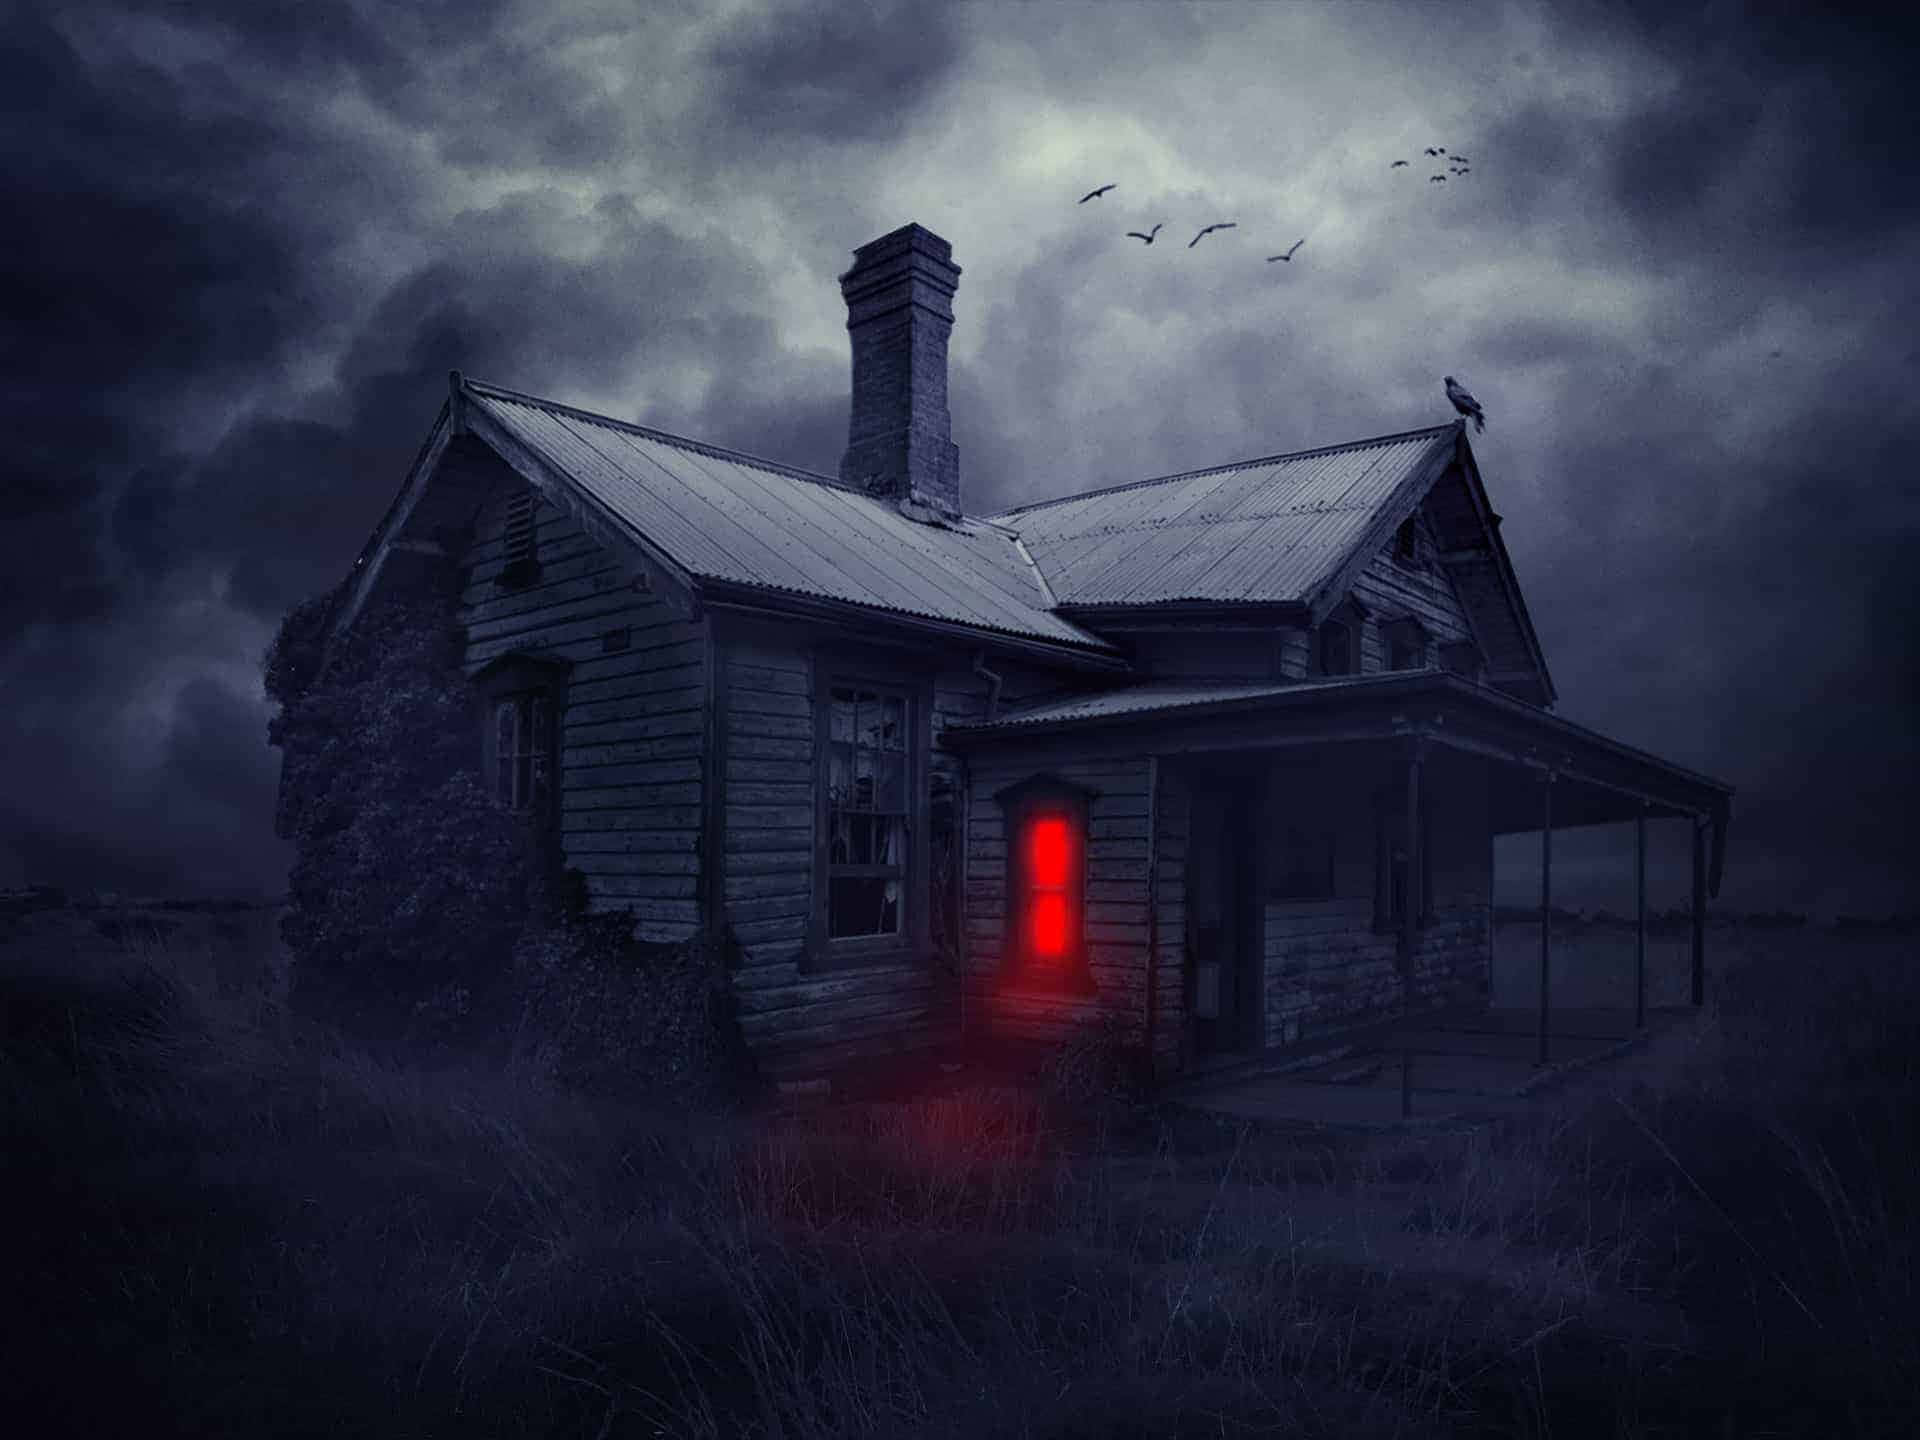 Explore the eerie depths of a hauntingly beautiful Haunted House